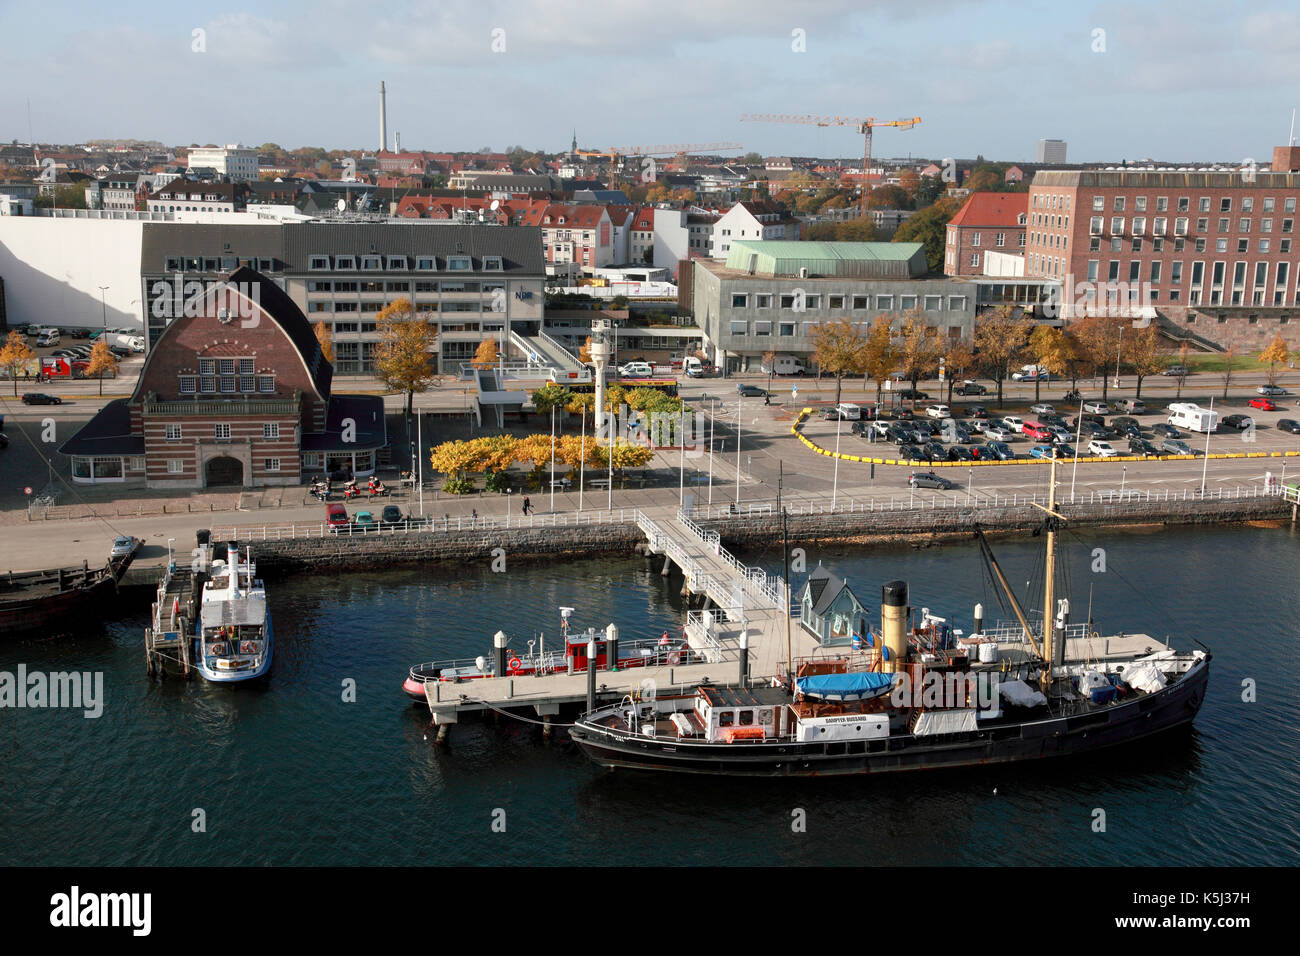 The port of Kiel, Germany between The Sweden Quay and the Baltic Sea Quay with the Maritime Museum front left Stock Photo